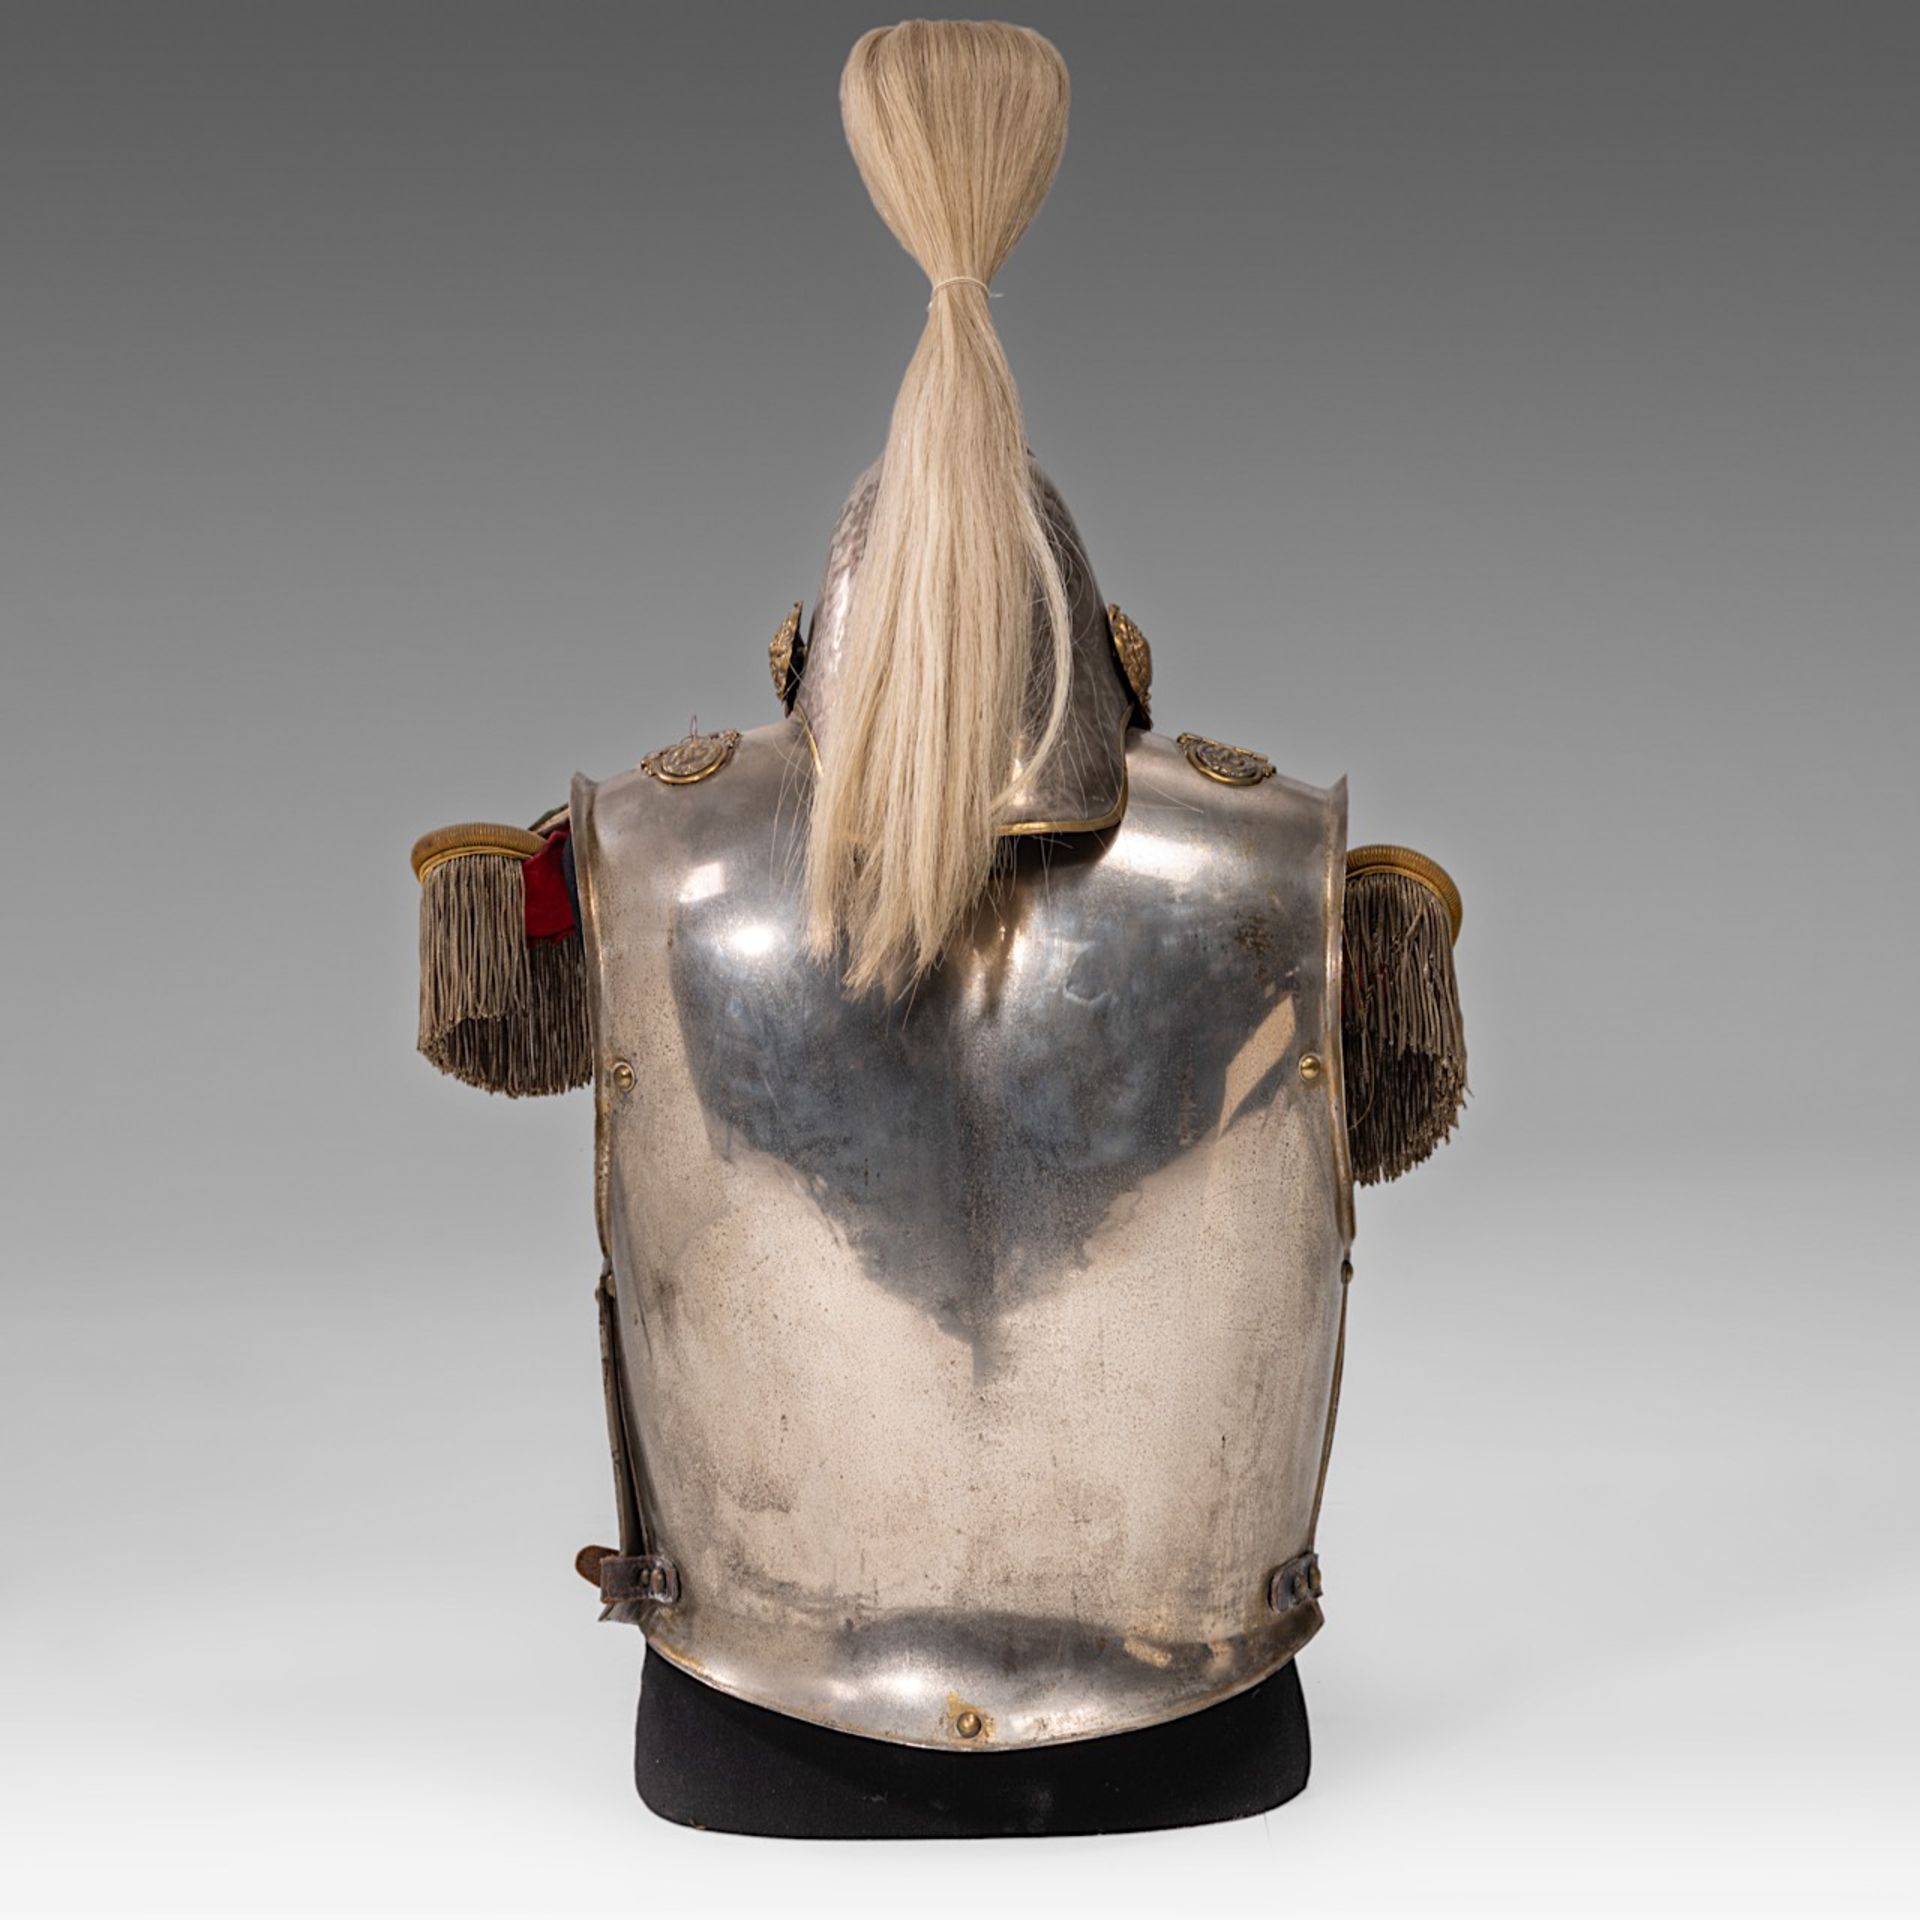 Cuirass and helmet of the Royal Horse Guards, metal and brass, Queen Victoria (1837-1901) - Image 5 of 8